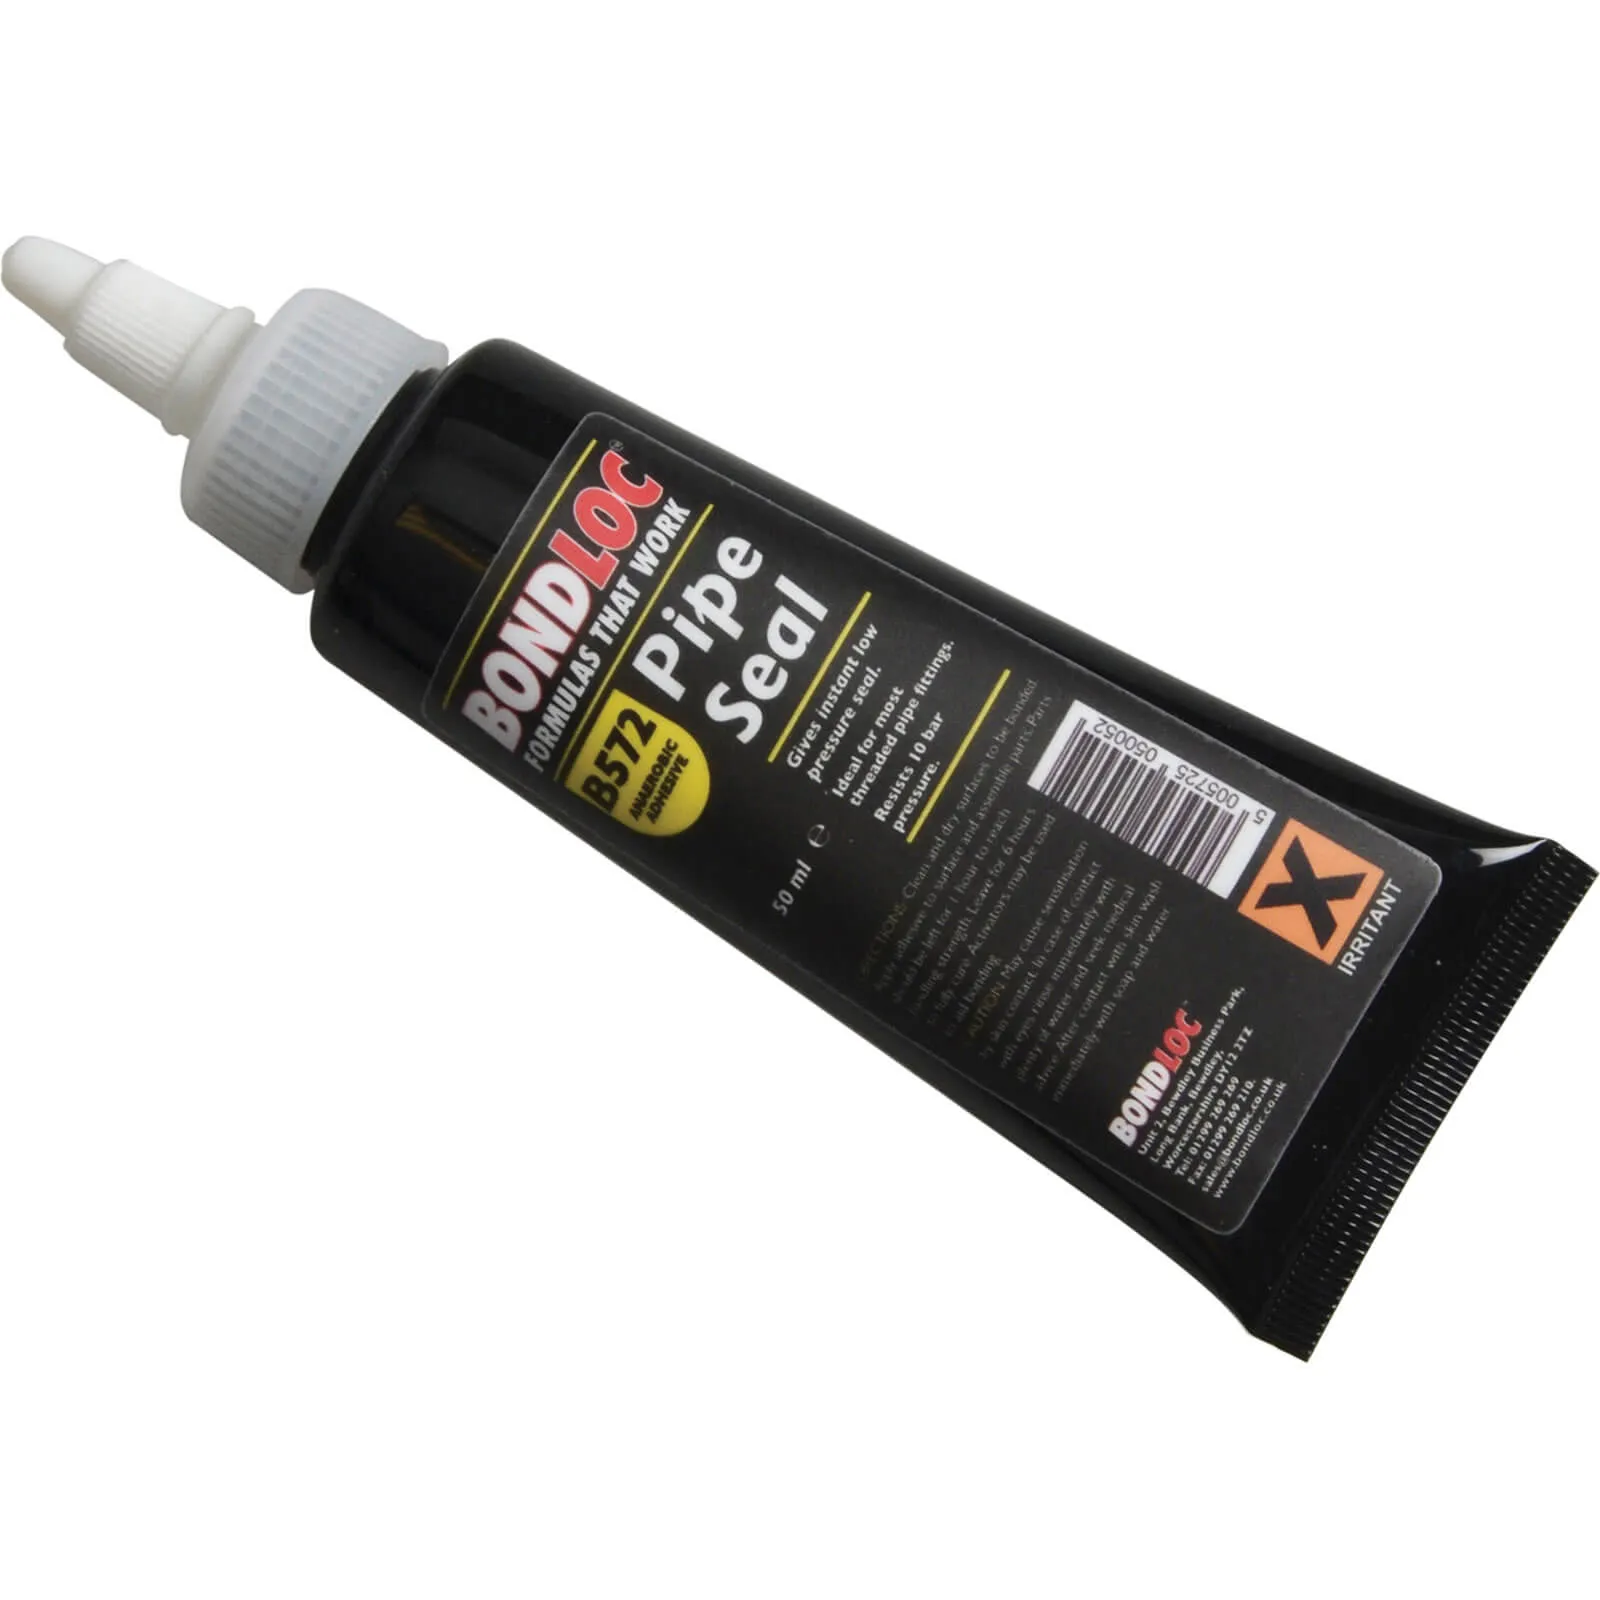 Bondloc B572 Pipeseal Slow Cure Sealant for Pipes and Fittings - 50ml